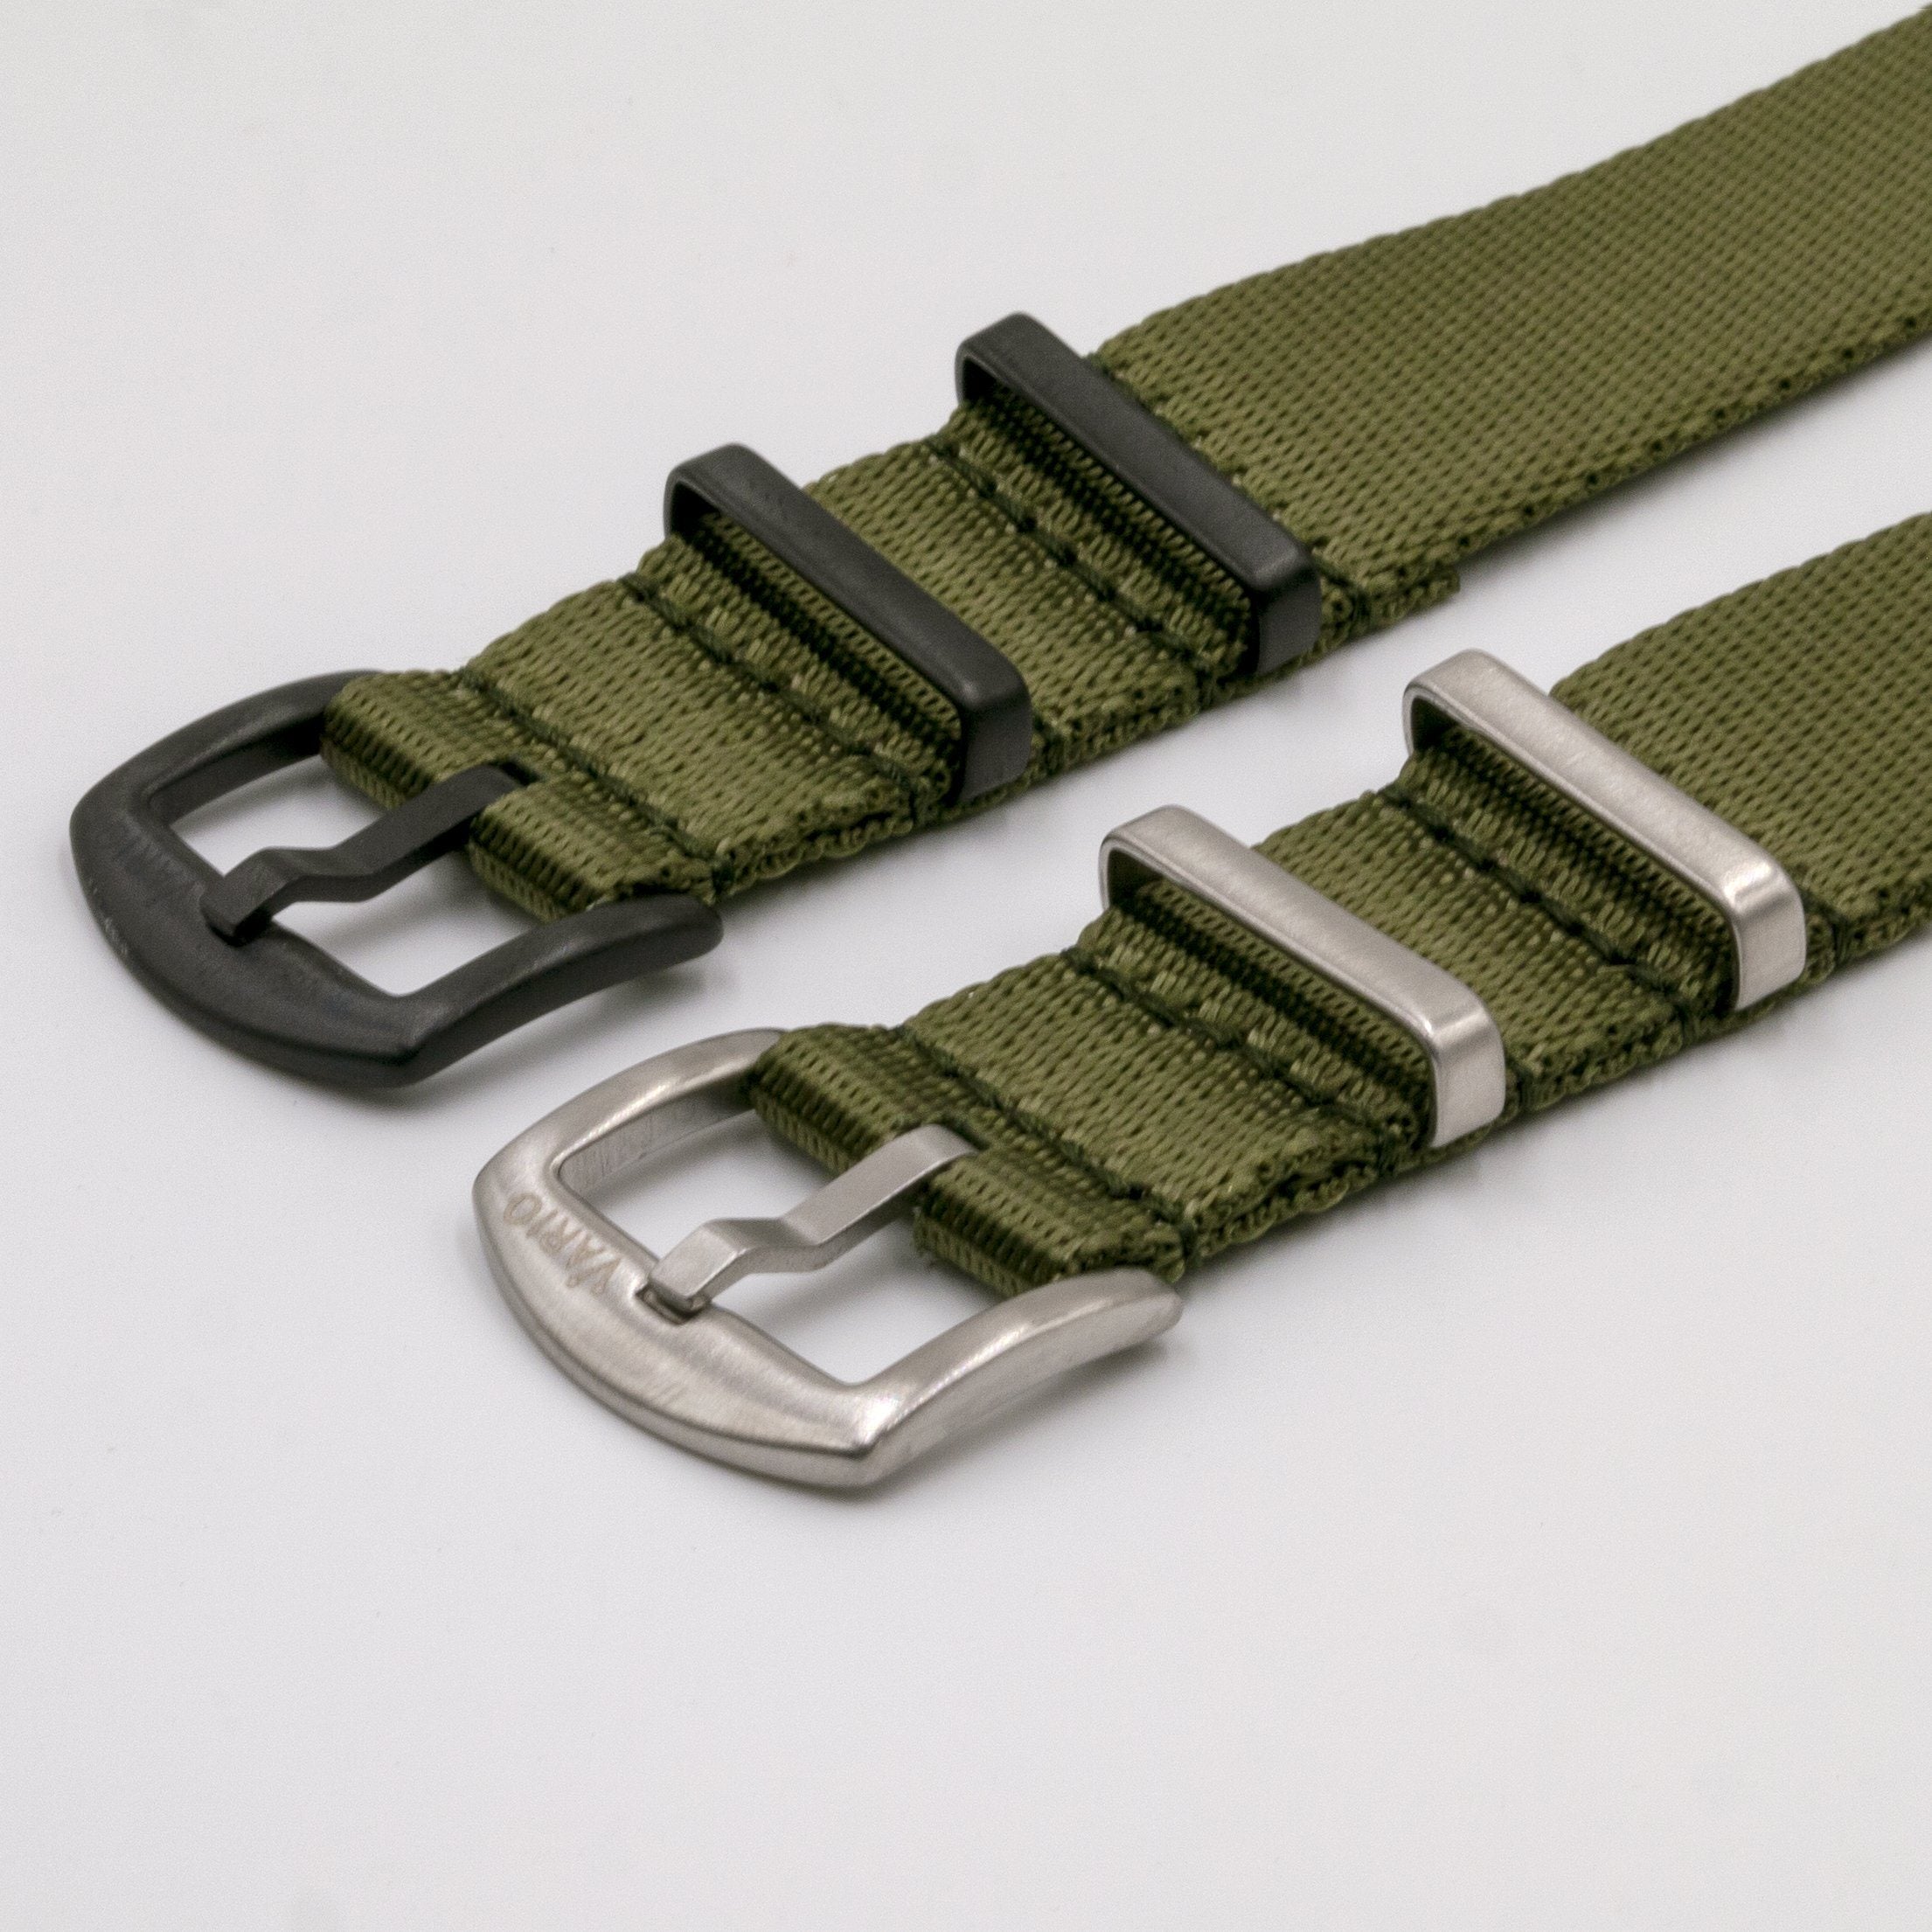 Seat Belt Olive Green Watch Strap with G-Shock Compatible Adapter and Spring Bar Tool